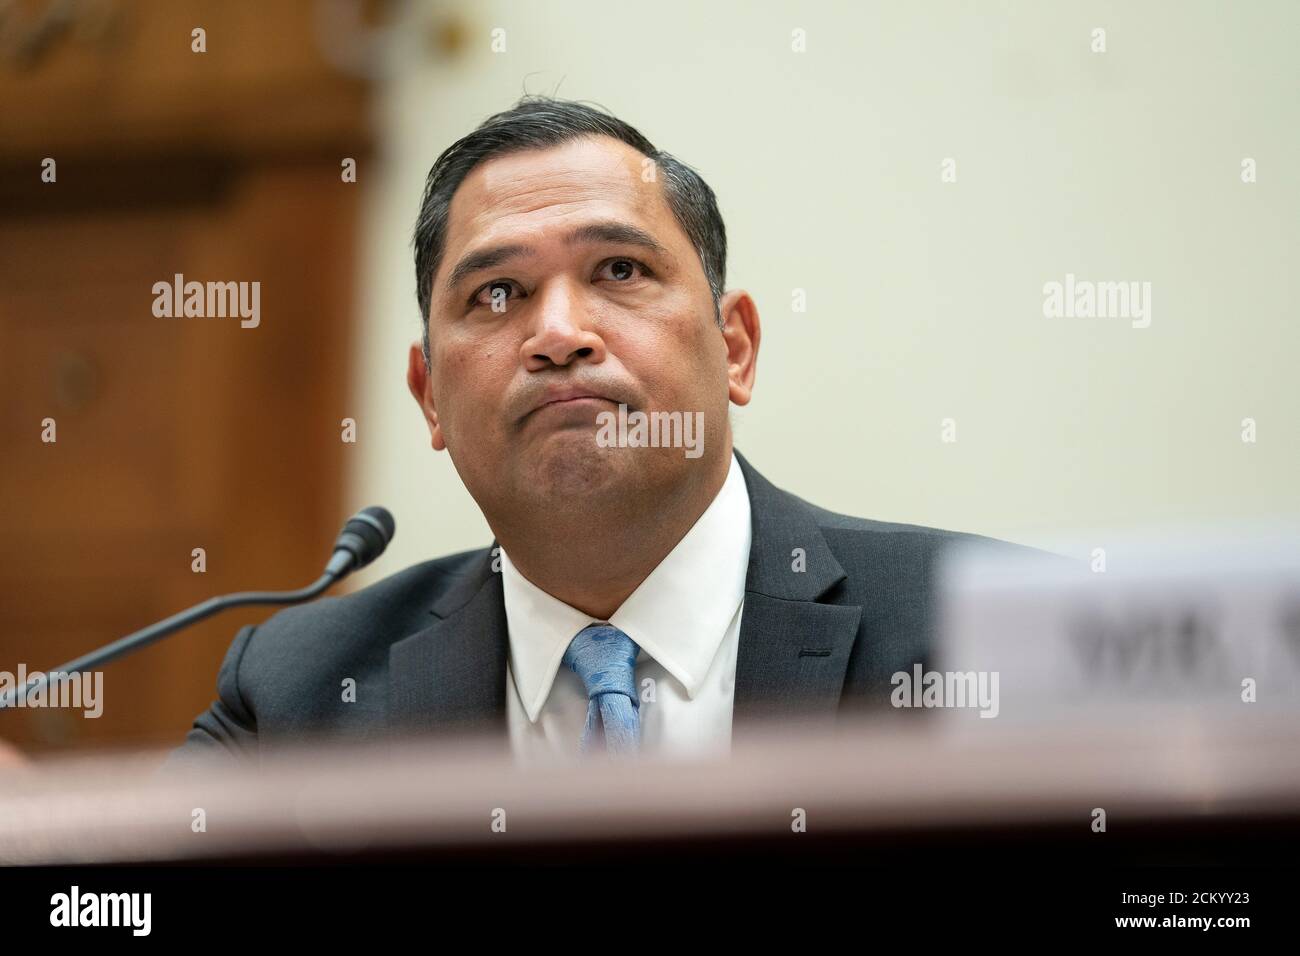 Washington, DC, USA. 16th Sep, 2020. Brian Bulatao, under secretary of state for management at the U.S. Department of State, listens during a House Foreign Affairs Committee hearing in Washington, DC, U.S., on Wednesday, Sept. 16, 2020. The hearing is investigating the firing of State Department Inspector General Steve Linick. Credit: Stefani Reynolds/Pool via CNP | usage worldwide Credit: dpa/Alamy Live News Stock Photo